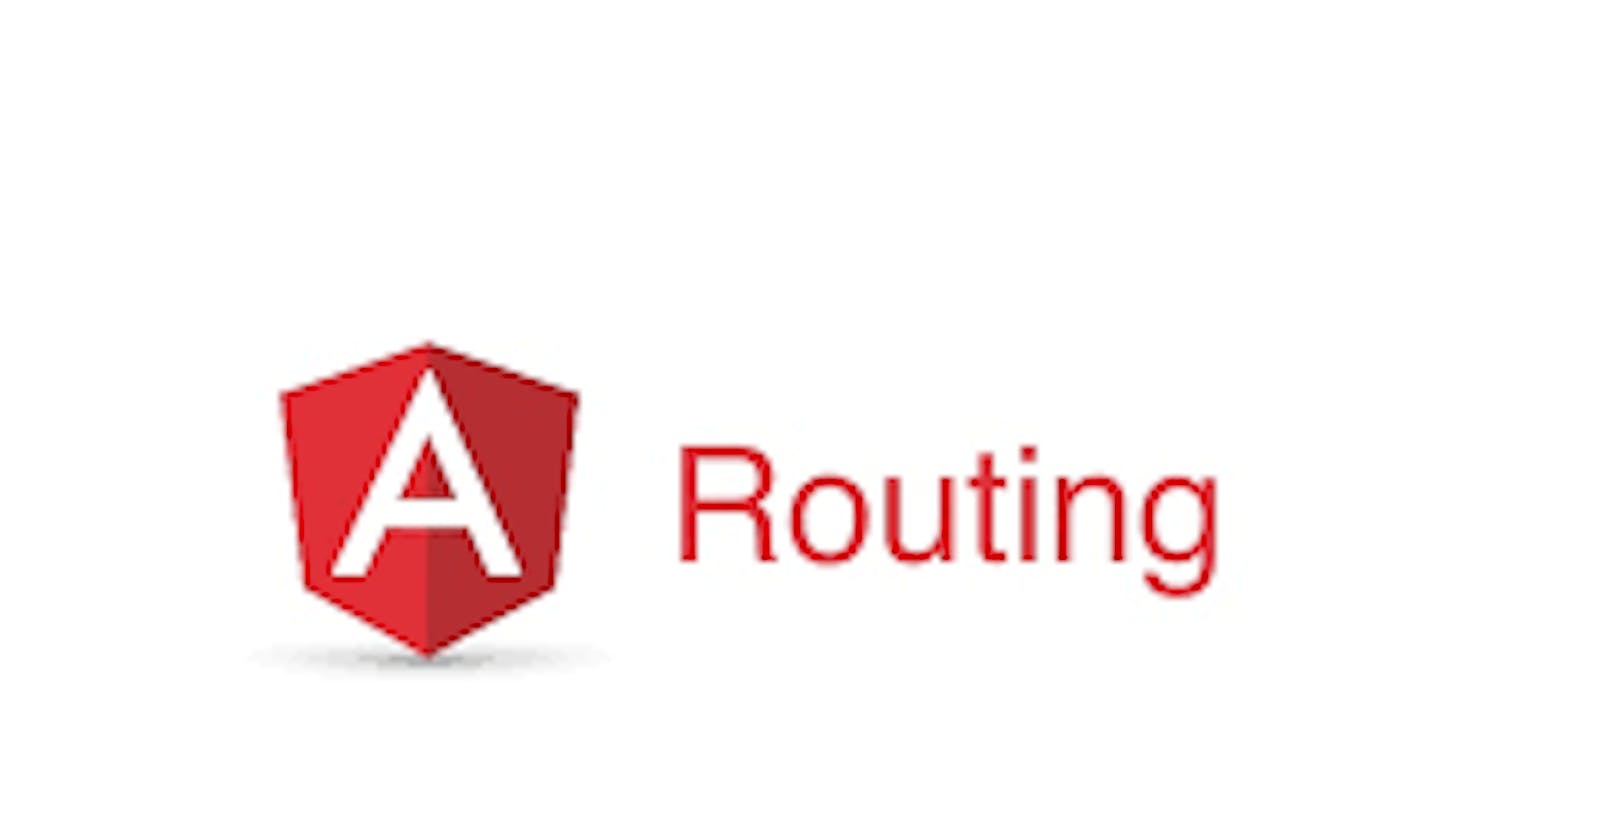 Complete guide to routing in angular